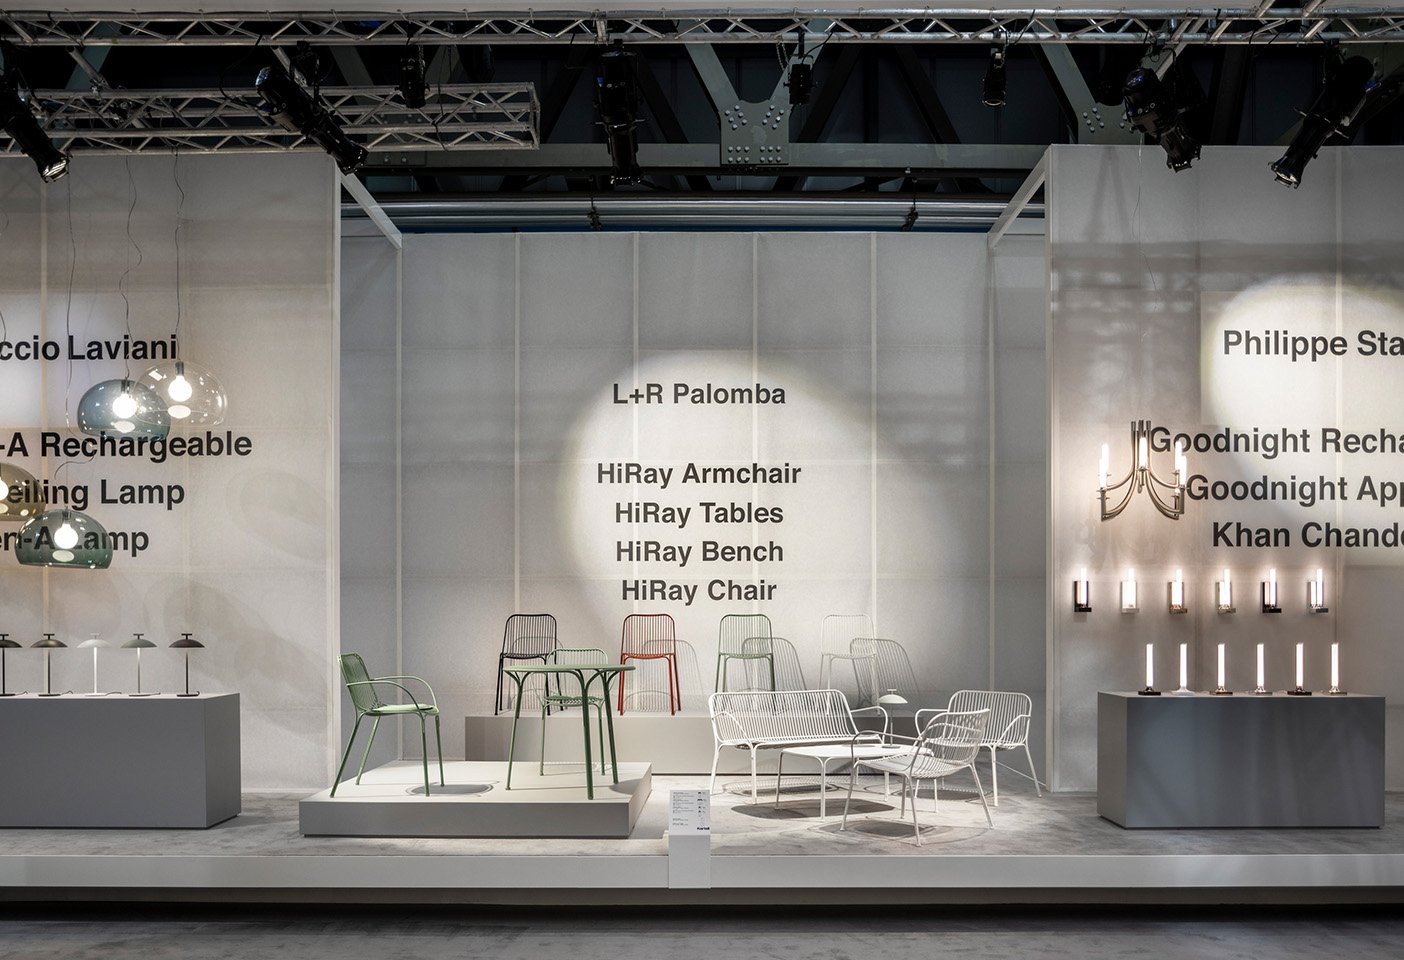 The Kartell stand at Salone del Mobile featured Philippe Starck's Goodnight 'candle' made with recycled materials and a battery option for extra flexibility. Photo c/o Kartell. 